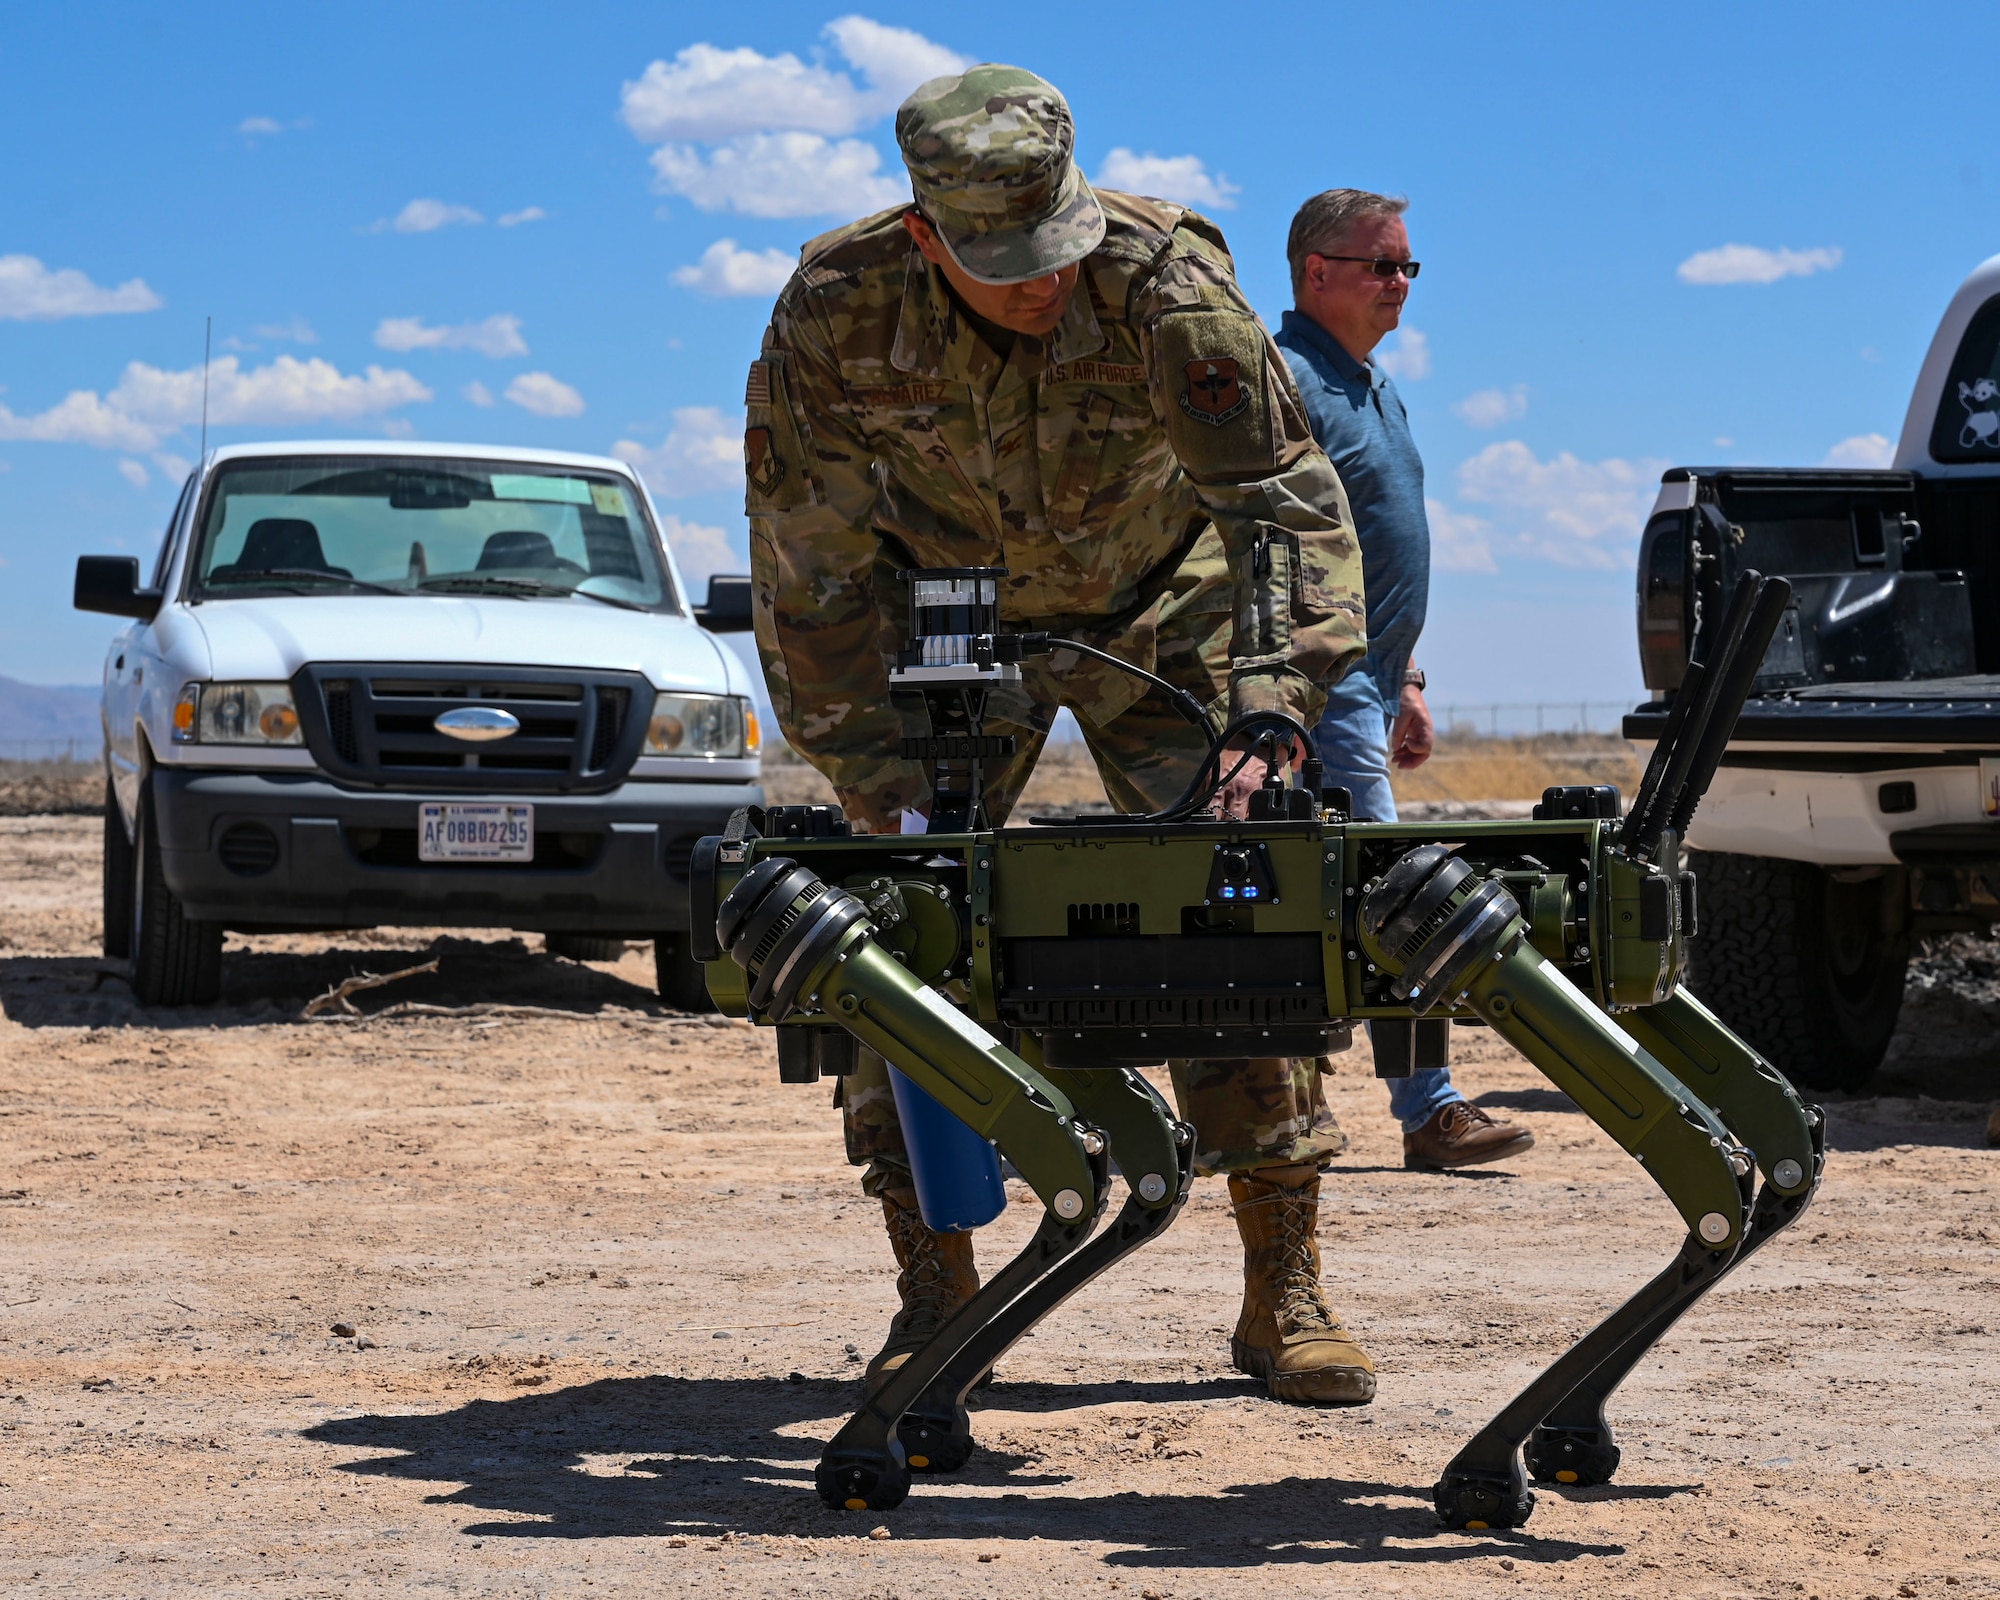 Col. Juan Alvarez, 49th Civil Engineer Squadron commander, inspects a Vision 60 Q-UGV ground robot at Holloman Air Force Base, New Mexico, April 17, 2023. The Vision 60 will be employed by the 49th SFS to monitor and secure the base boundaries for maximum security and reinforcement. (U.S. Air Force photo by Airman 1st Class Isaiah Pedrazzini)